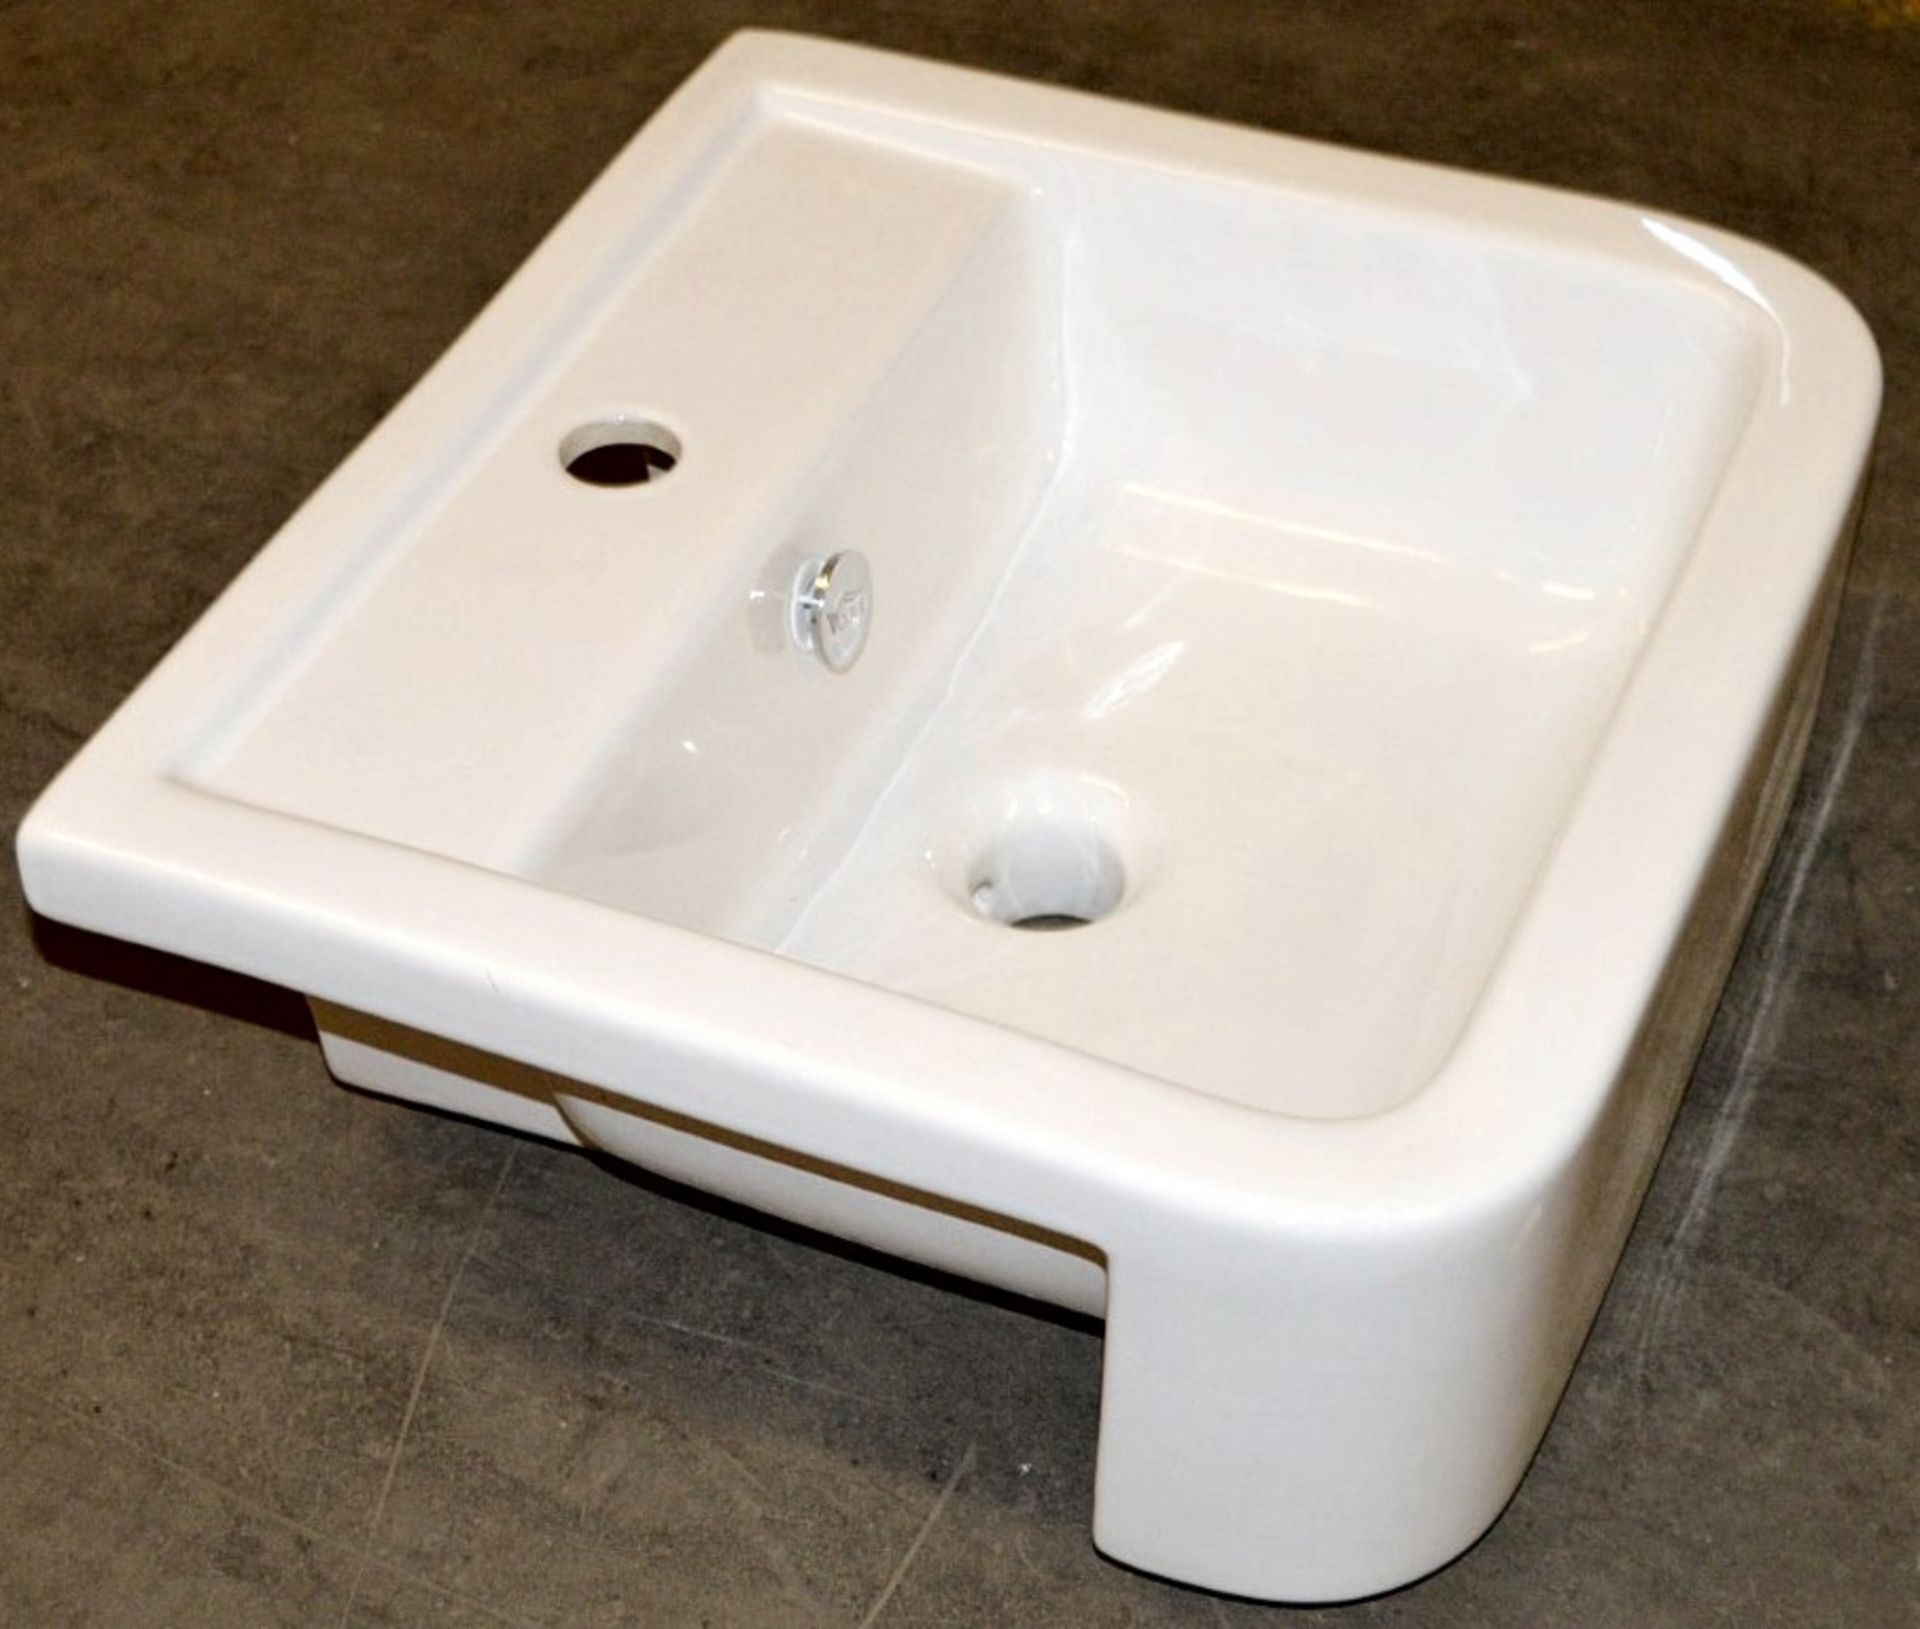 10 x Vogue Bathrooms OPTIONS Single Tap Hole SEMI RECESSED SINK BASINS - 450mm Width - Brand New - Image 2 of 4